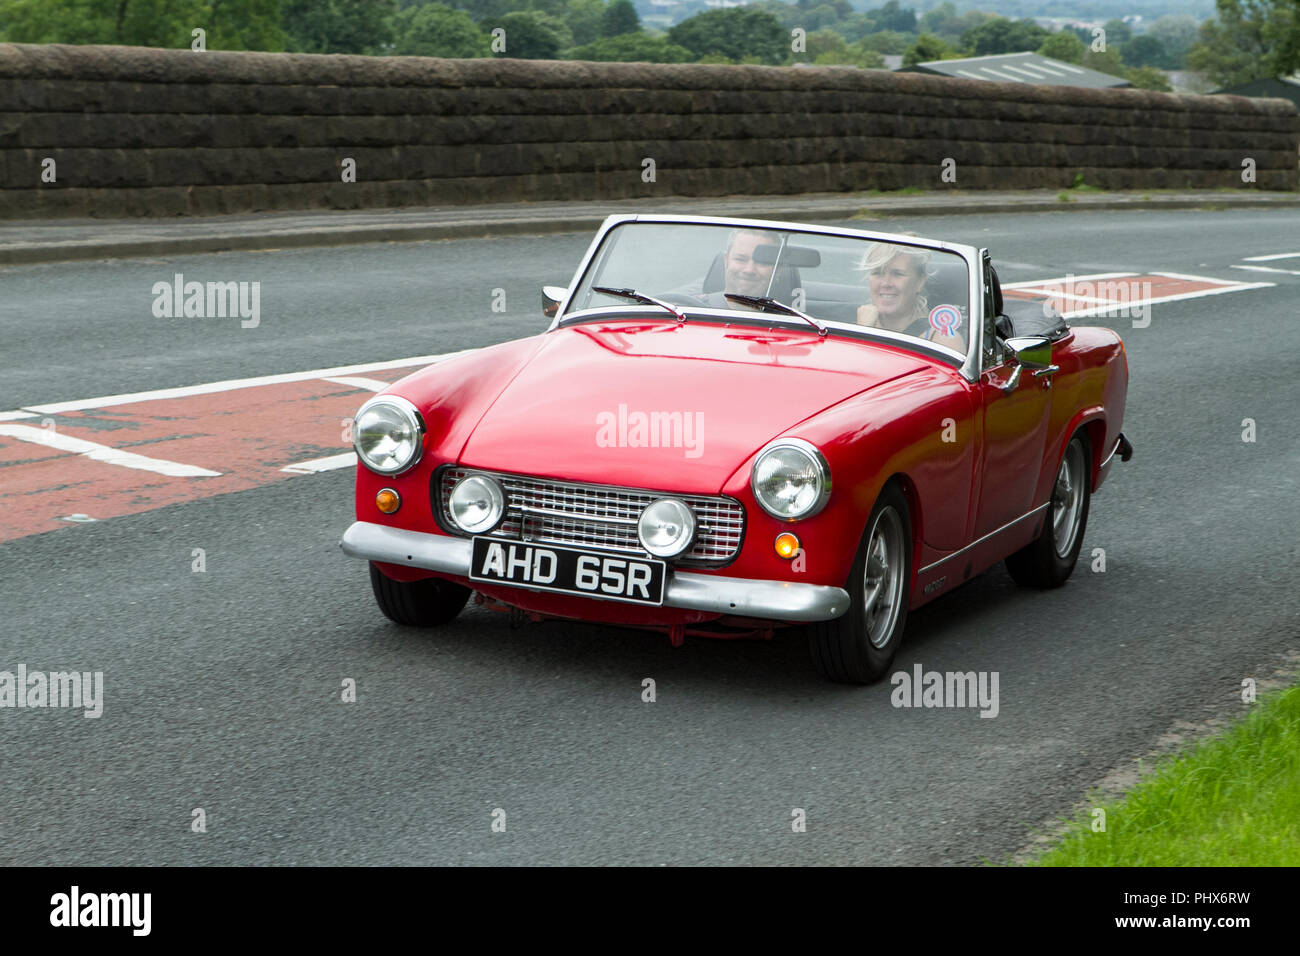 1997 Red AHD65R  MG Midget 1500 at Hoghton towers annual classic vintage car rally, UK Stock Photo